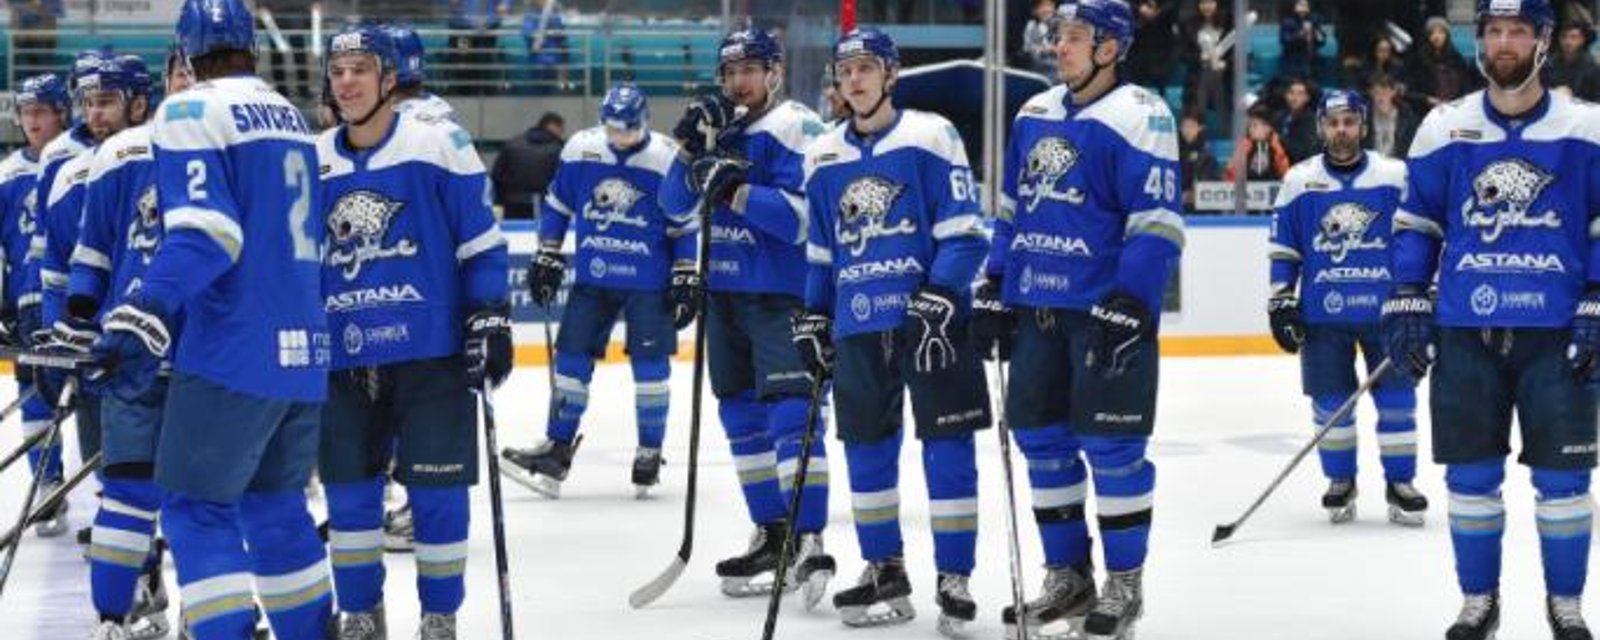 KHL team slaughters a live sheep at center ice in gruesome traditional ceremony!